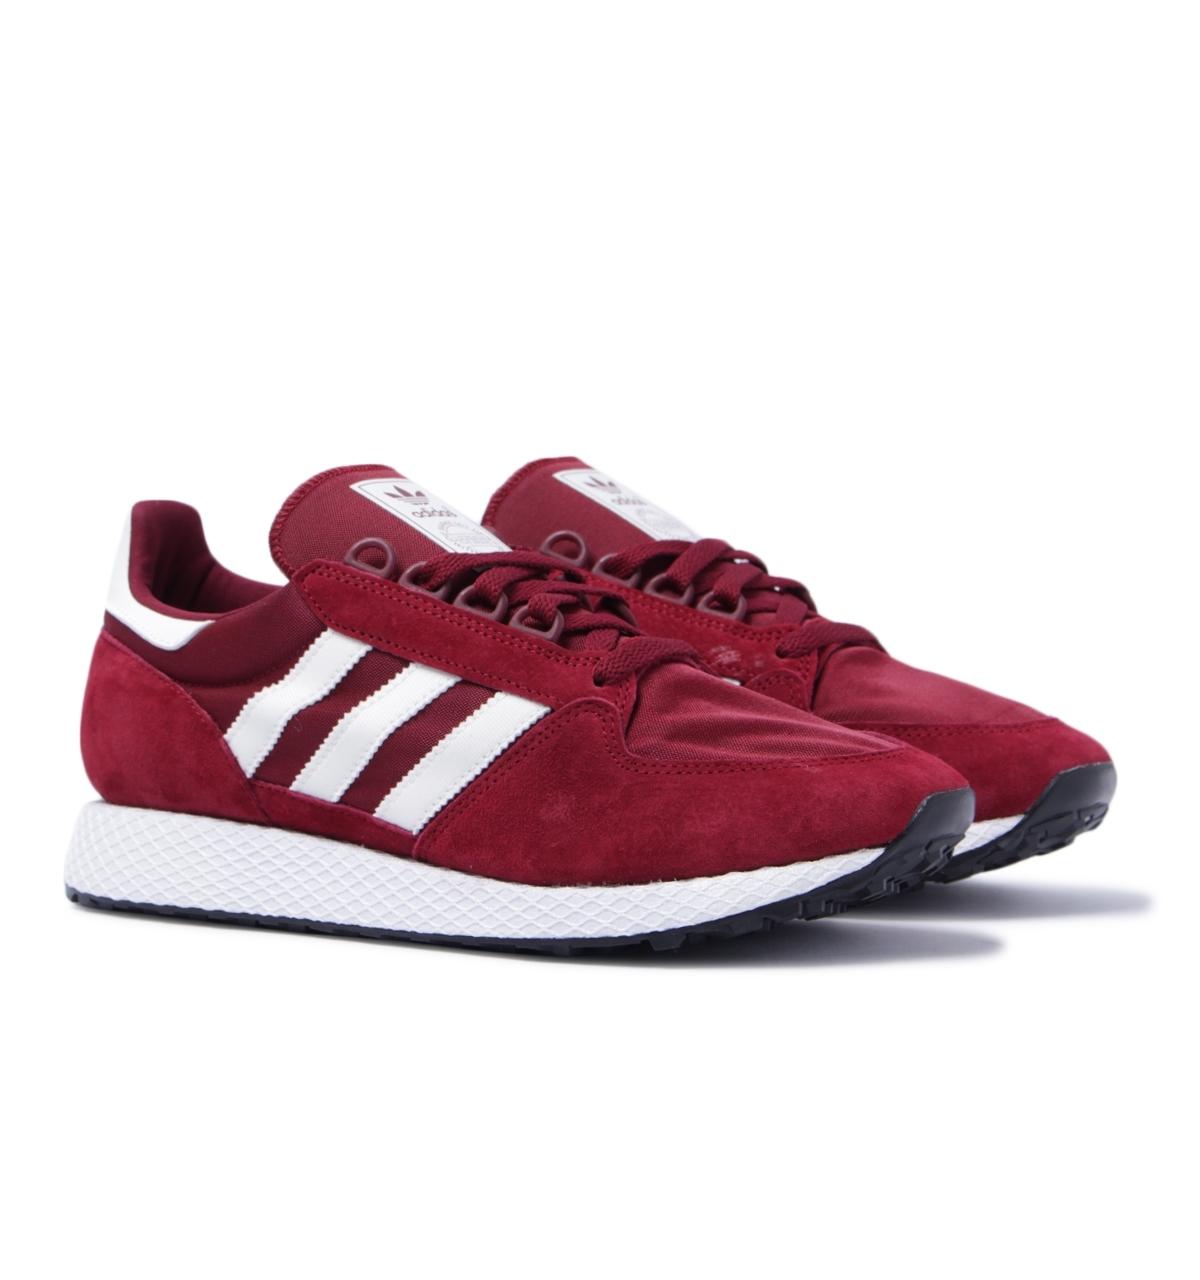 adidas originals burgundy and white forest grove trainers